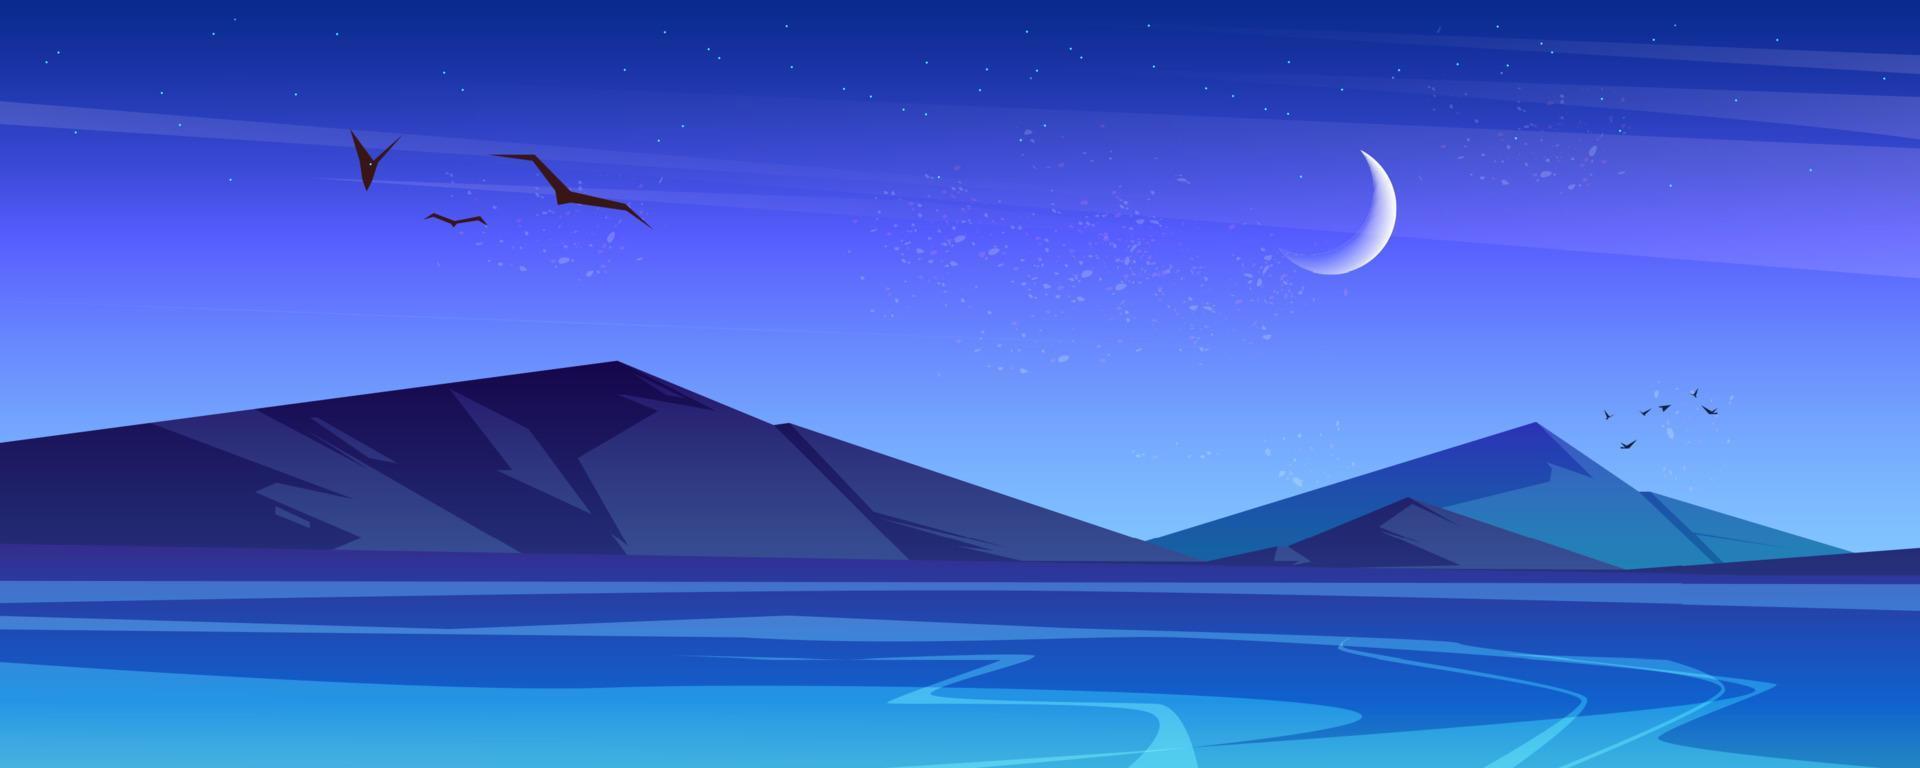 Night landscape with sea and mountains on horizon vector